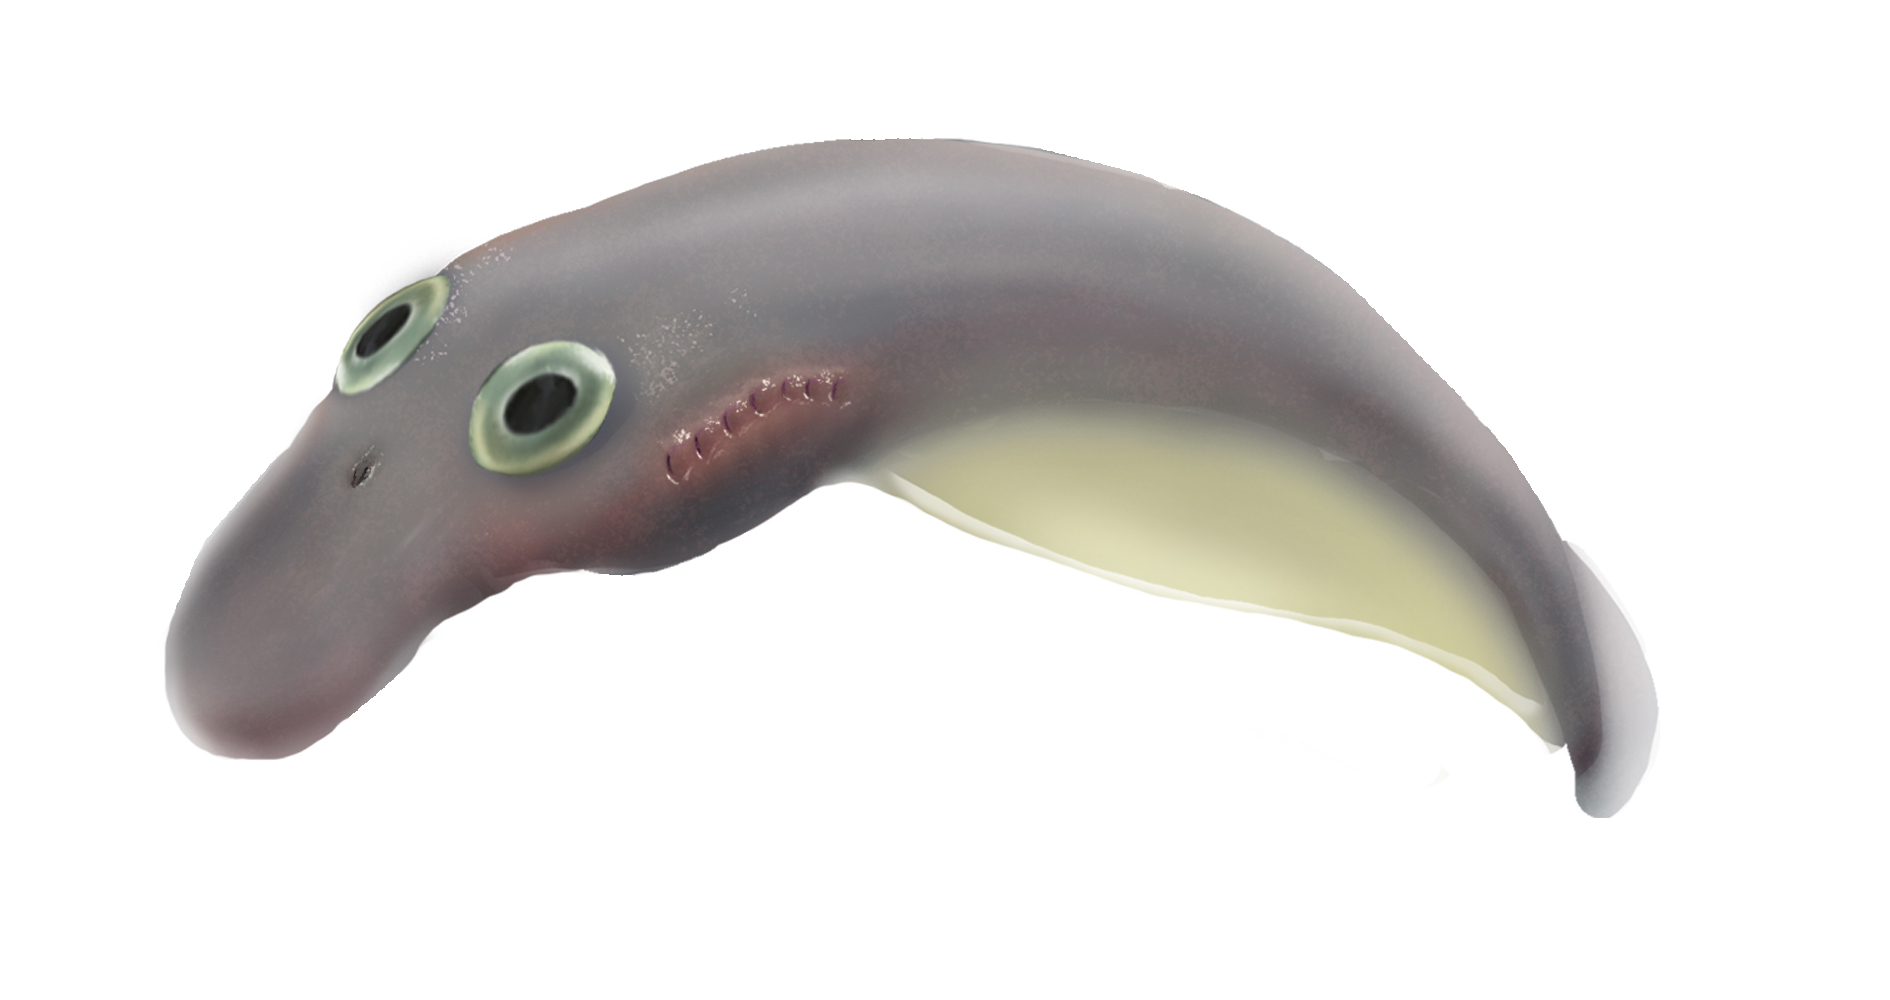 These fossilized lamprey hatchlings disprove an age-old evolutionary theory